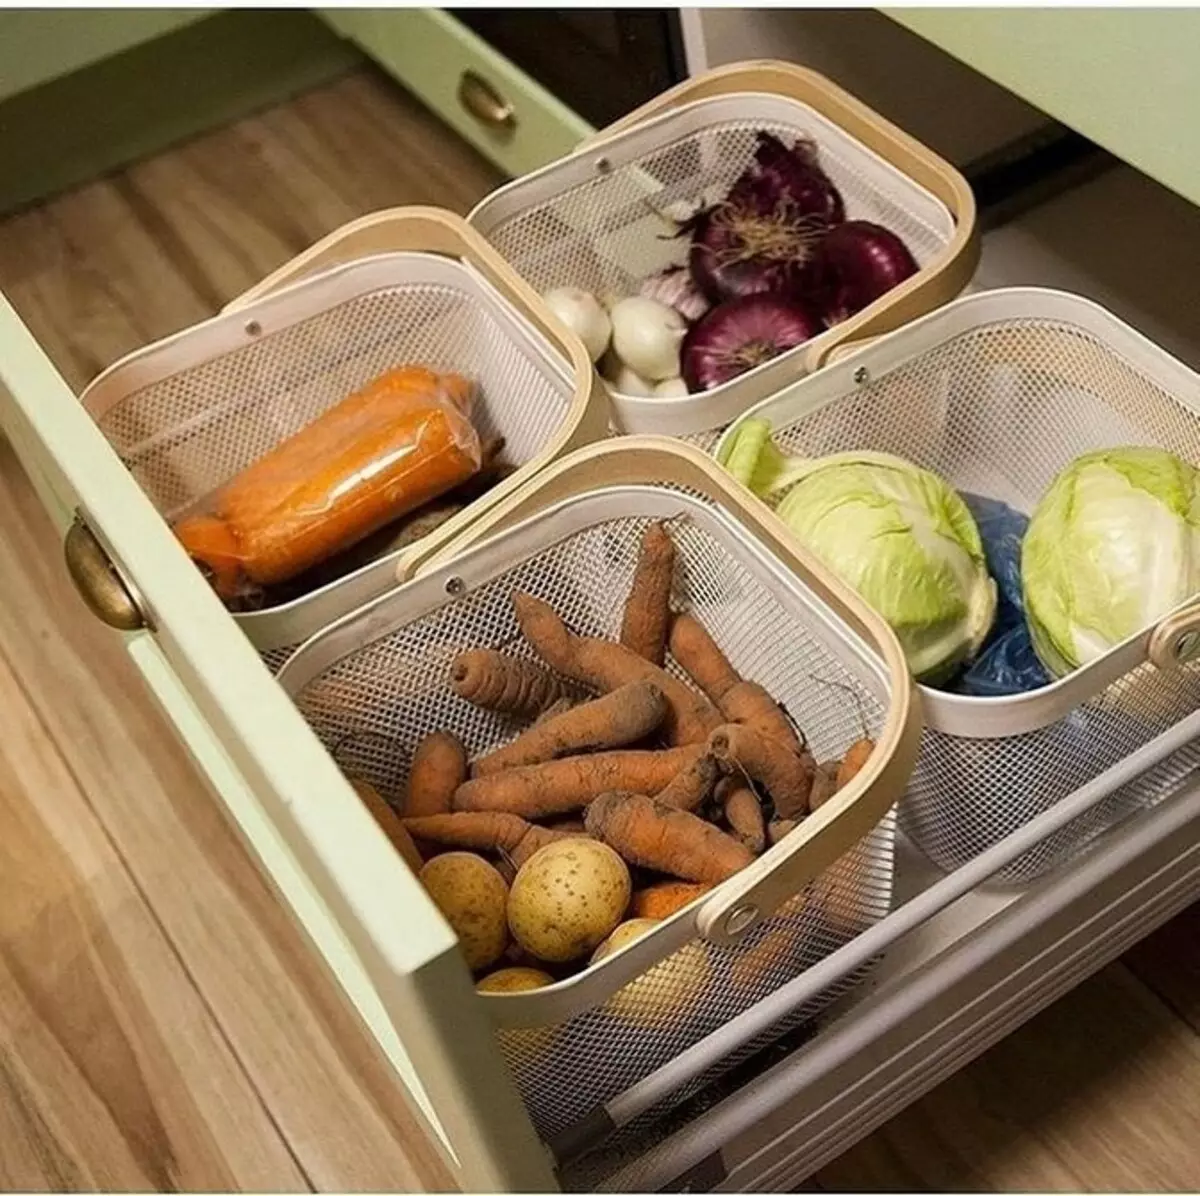 8 ideas for storing vegetables and fruits (if there is not enough space in the refrigerator) 23597_13